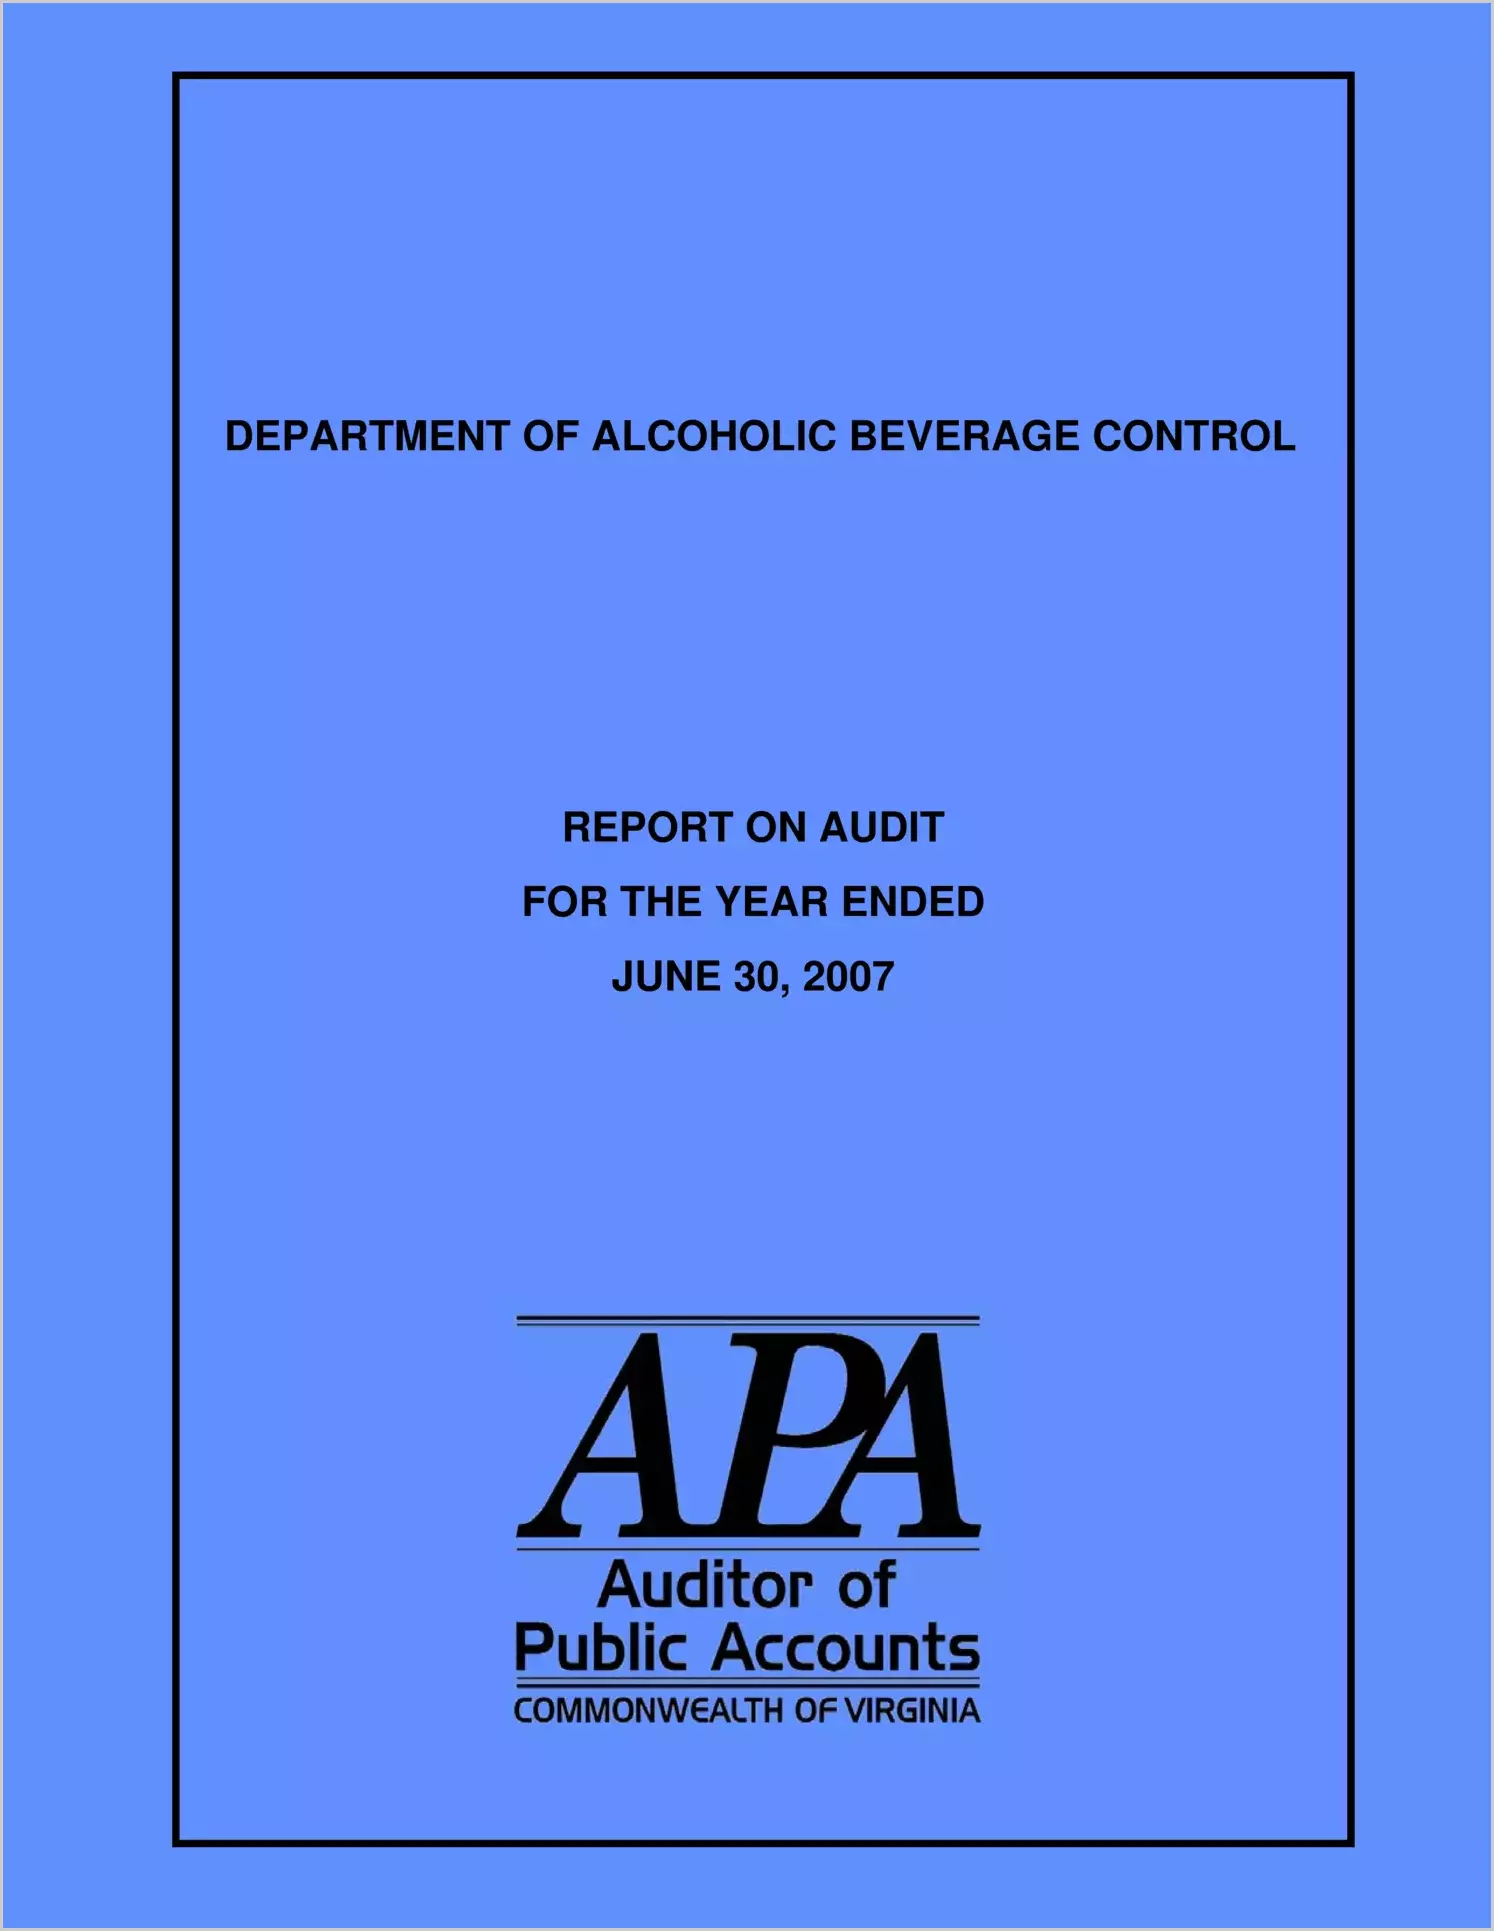 Department of Alcoholic Beverage Control for the year ended June 30, 2007